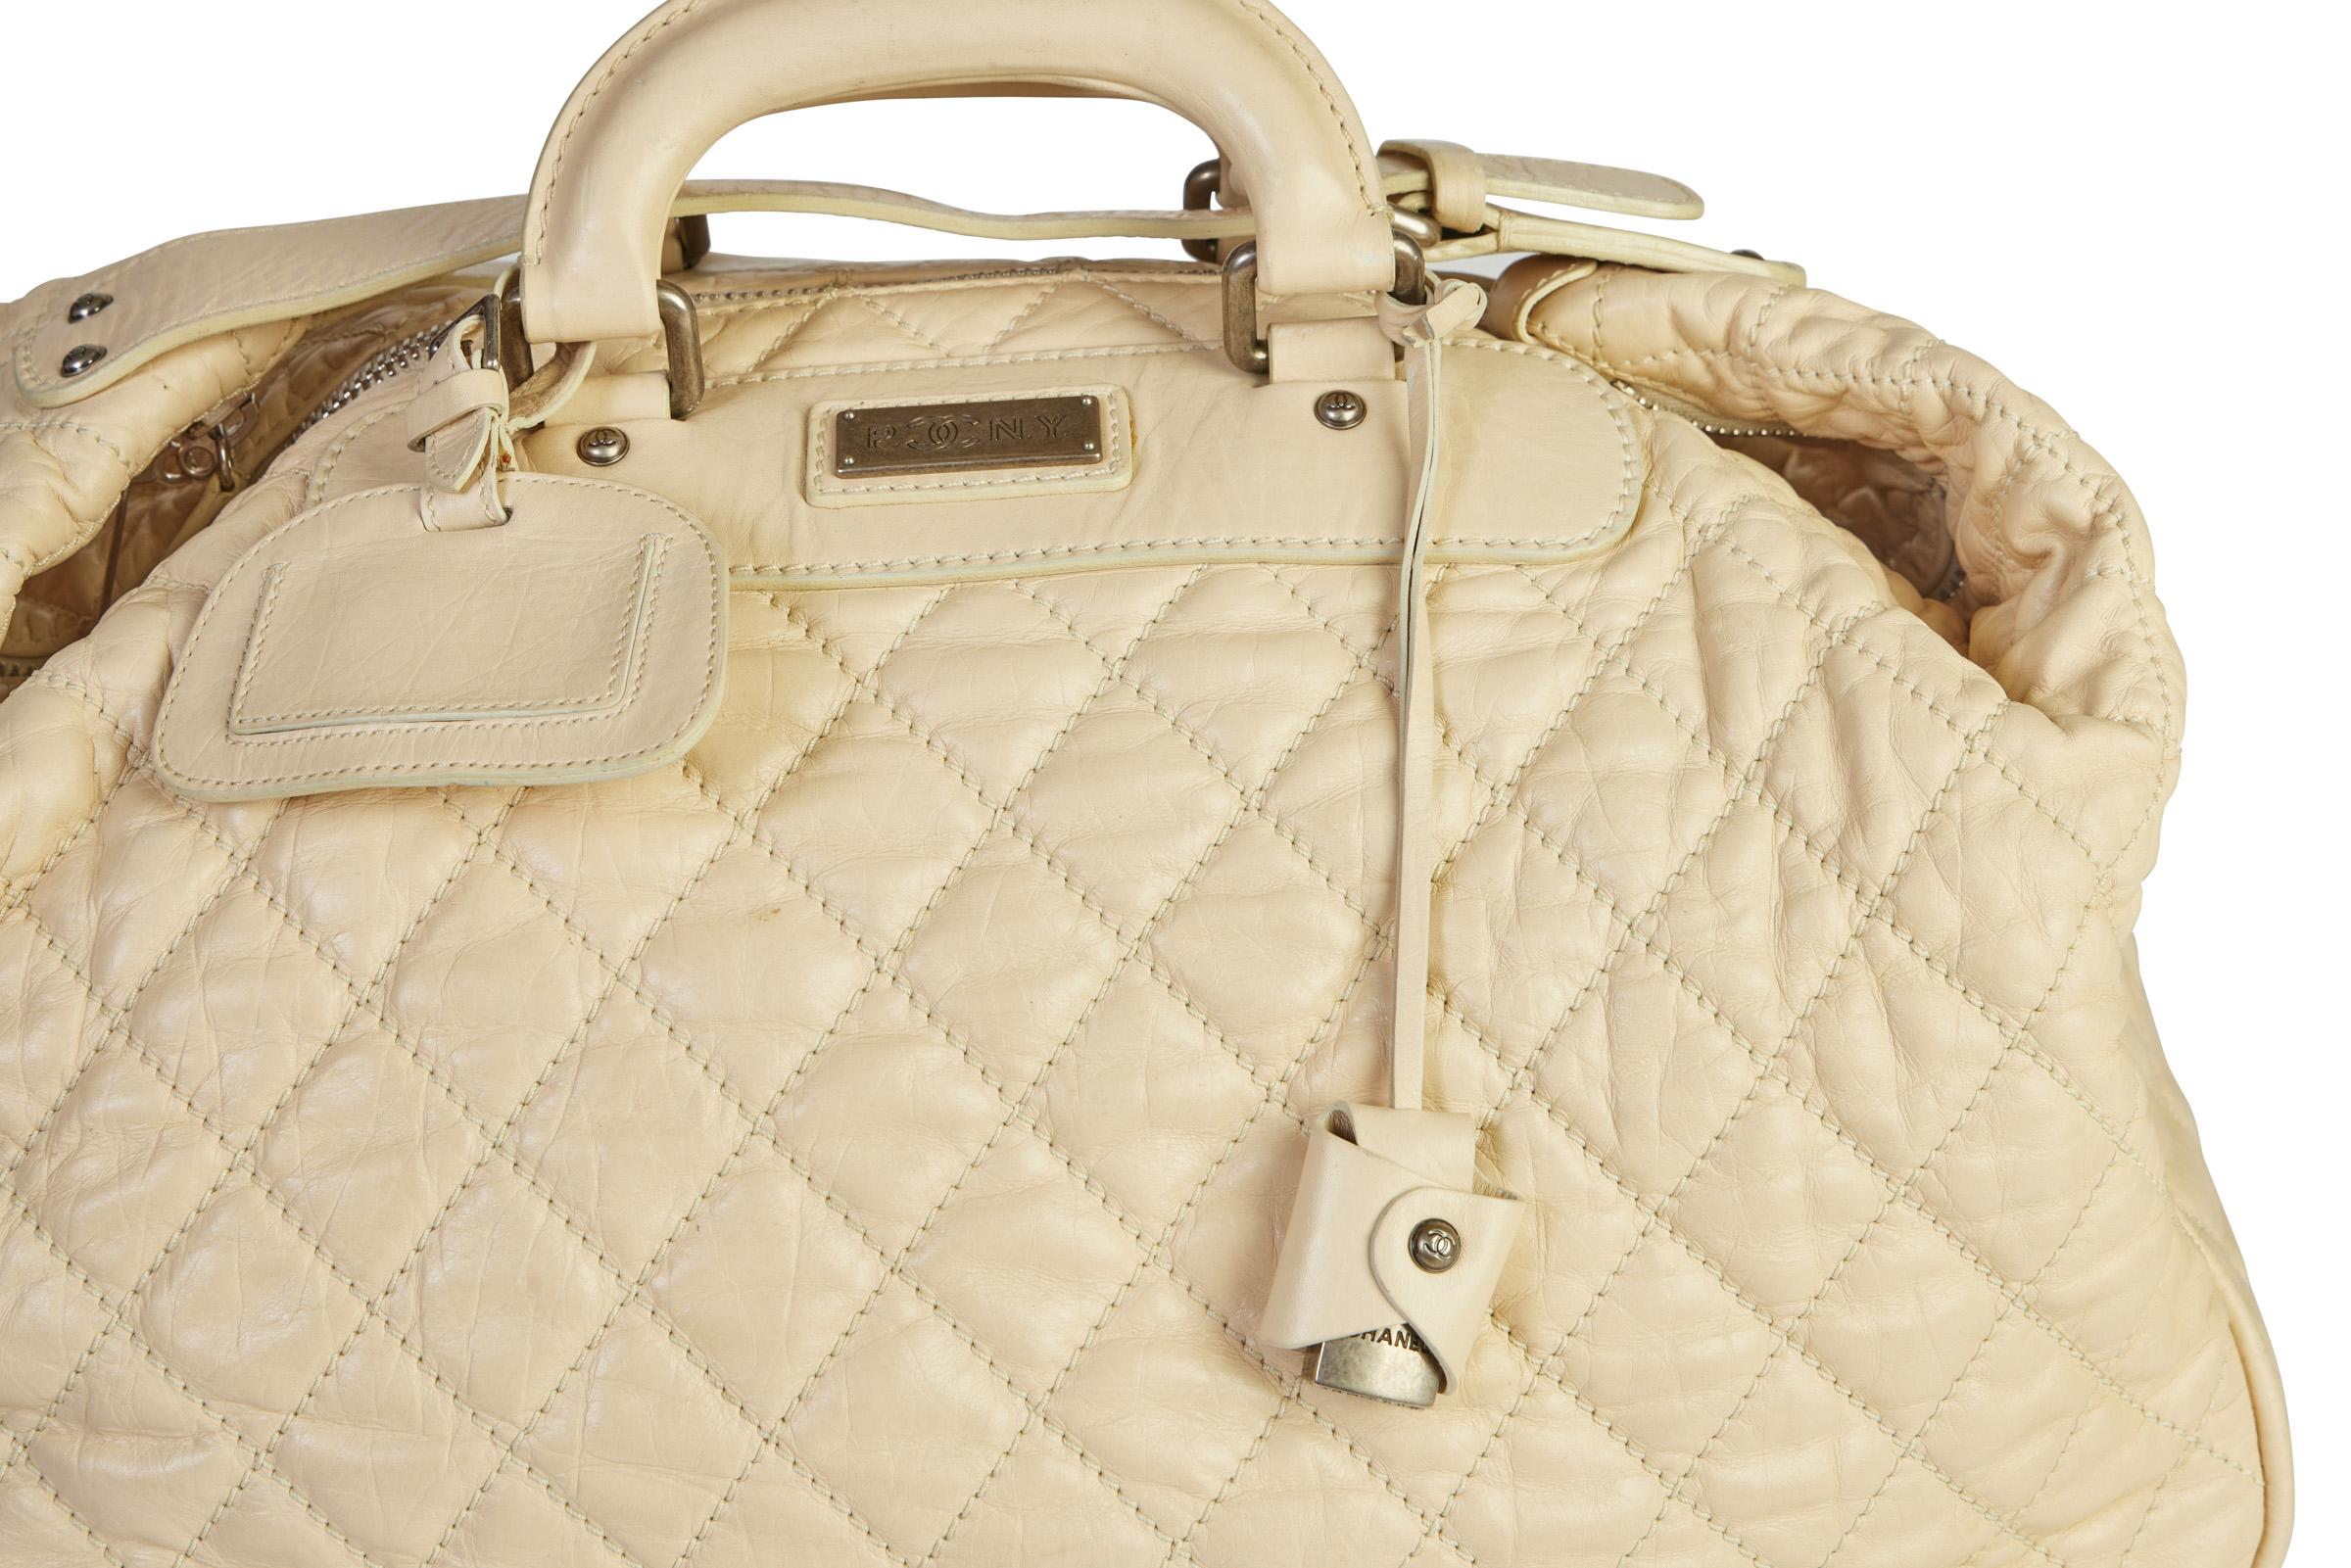 Chanel Paris New York Cream Traveler Weekender Bag In Good Condition For Sale In West Hollywood, CA